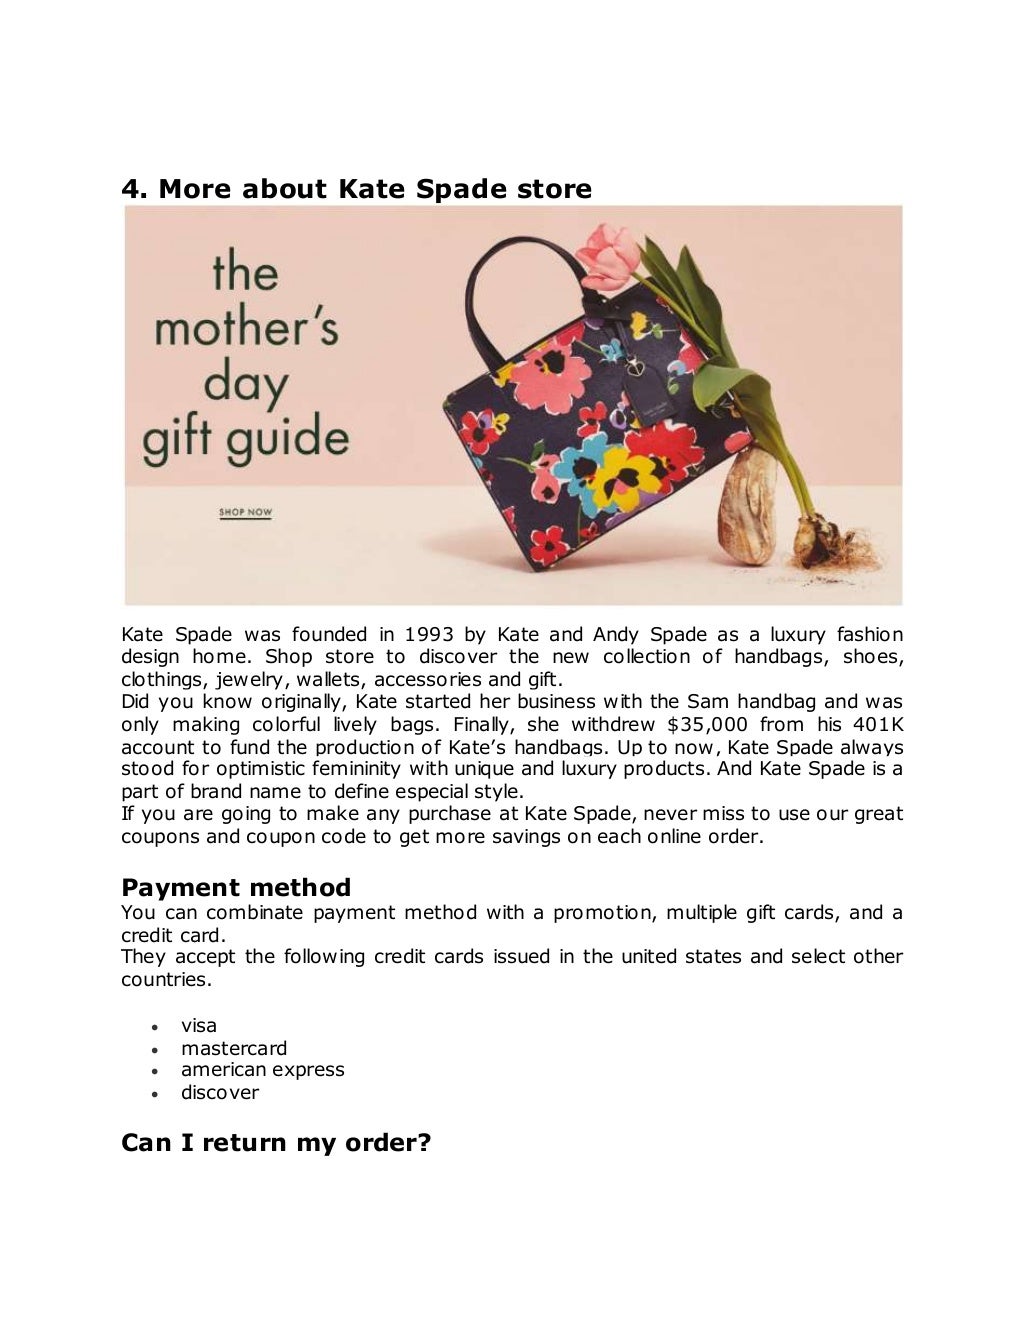 Luxury fashion with kate spade coupon code to pay less